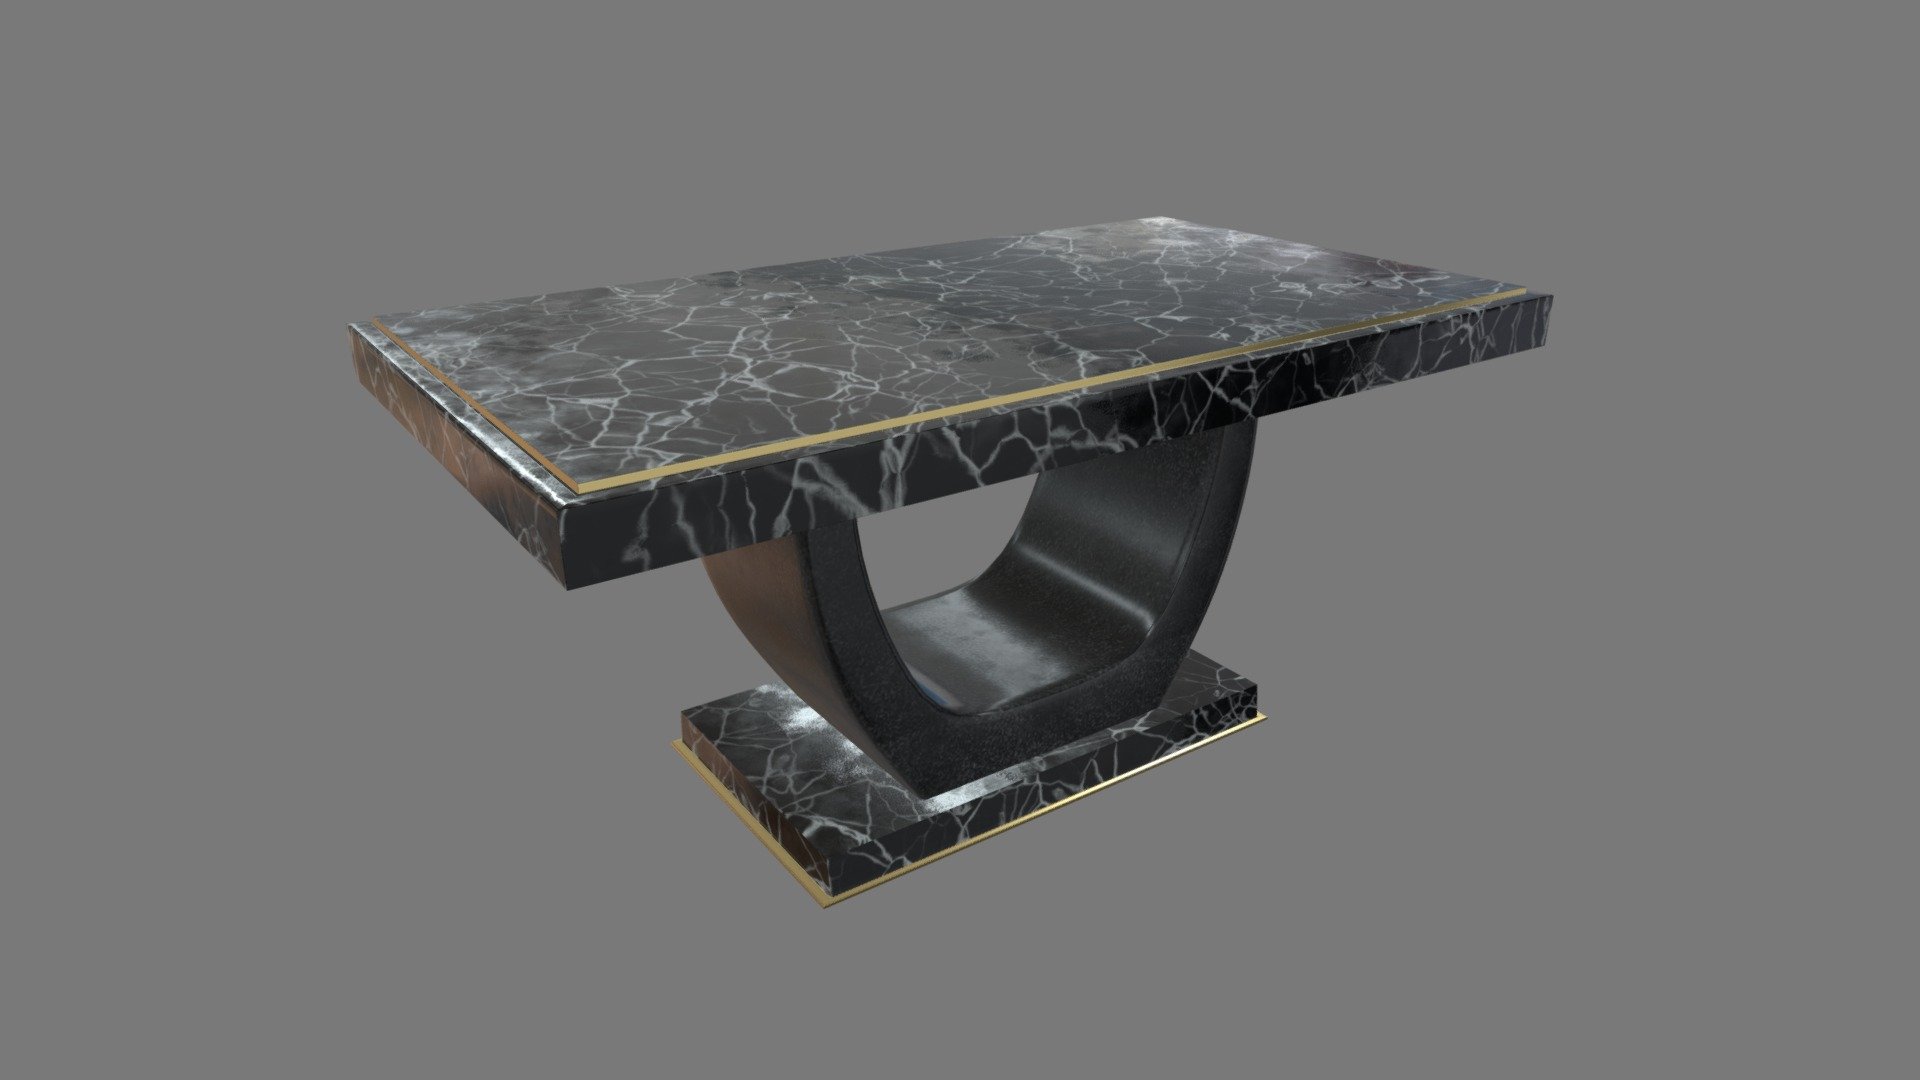 This model contains a Modern Luxury Dinner Table based on a Dinner Table furniture which i modeled in Maya 2018. This model is perfect to create a new great scene from a house or an office or whatever you think is great.

If you need any kind of help contact me, i will help you with everything i can. If you like the model please give me some feedback, I would appreciate it.

If you experience any kind of difficulties, be sure to contact me and i will help you. Sincerely Yours, ViperJr3D - Modern Luxury Dinner Table - Buy Royalty Free 3D model by ViperJr3D 3d model